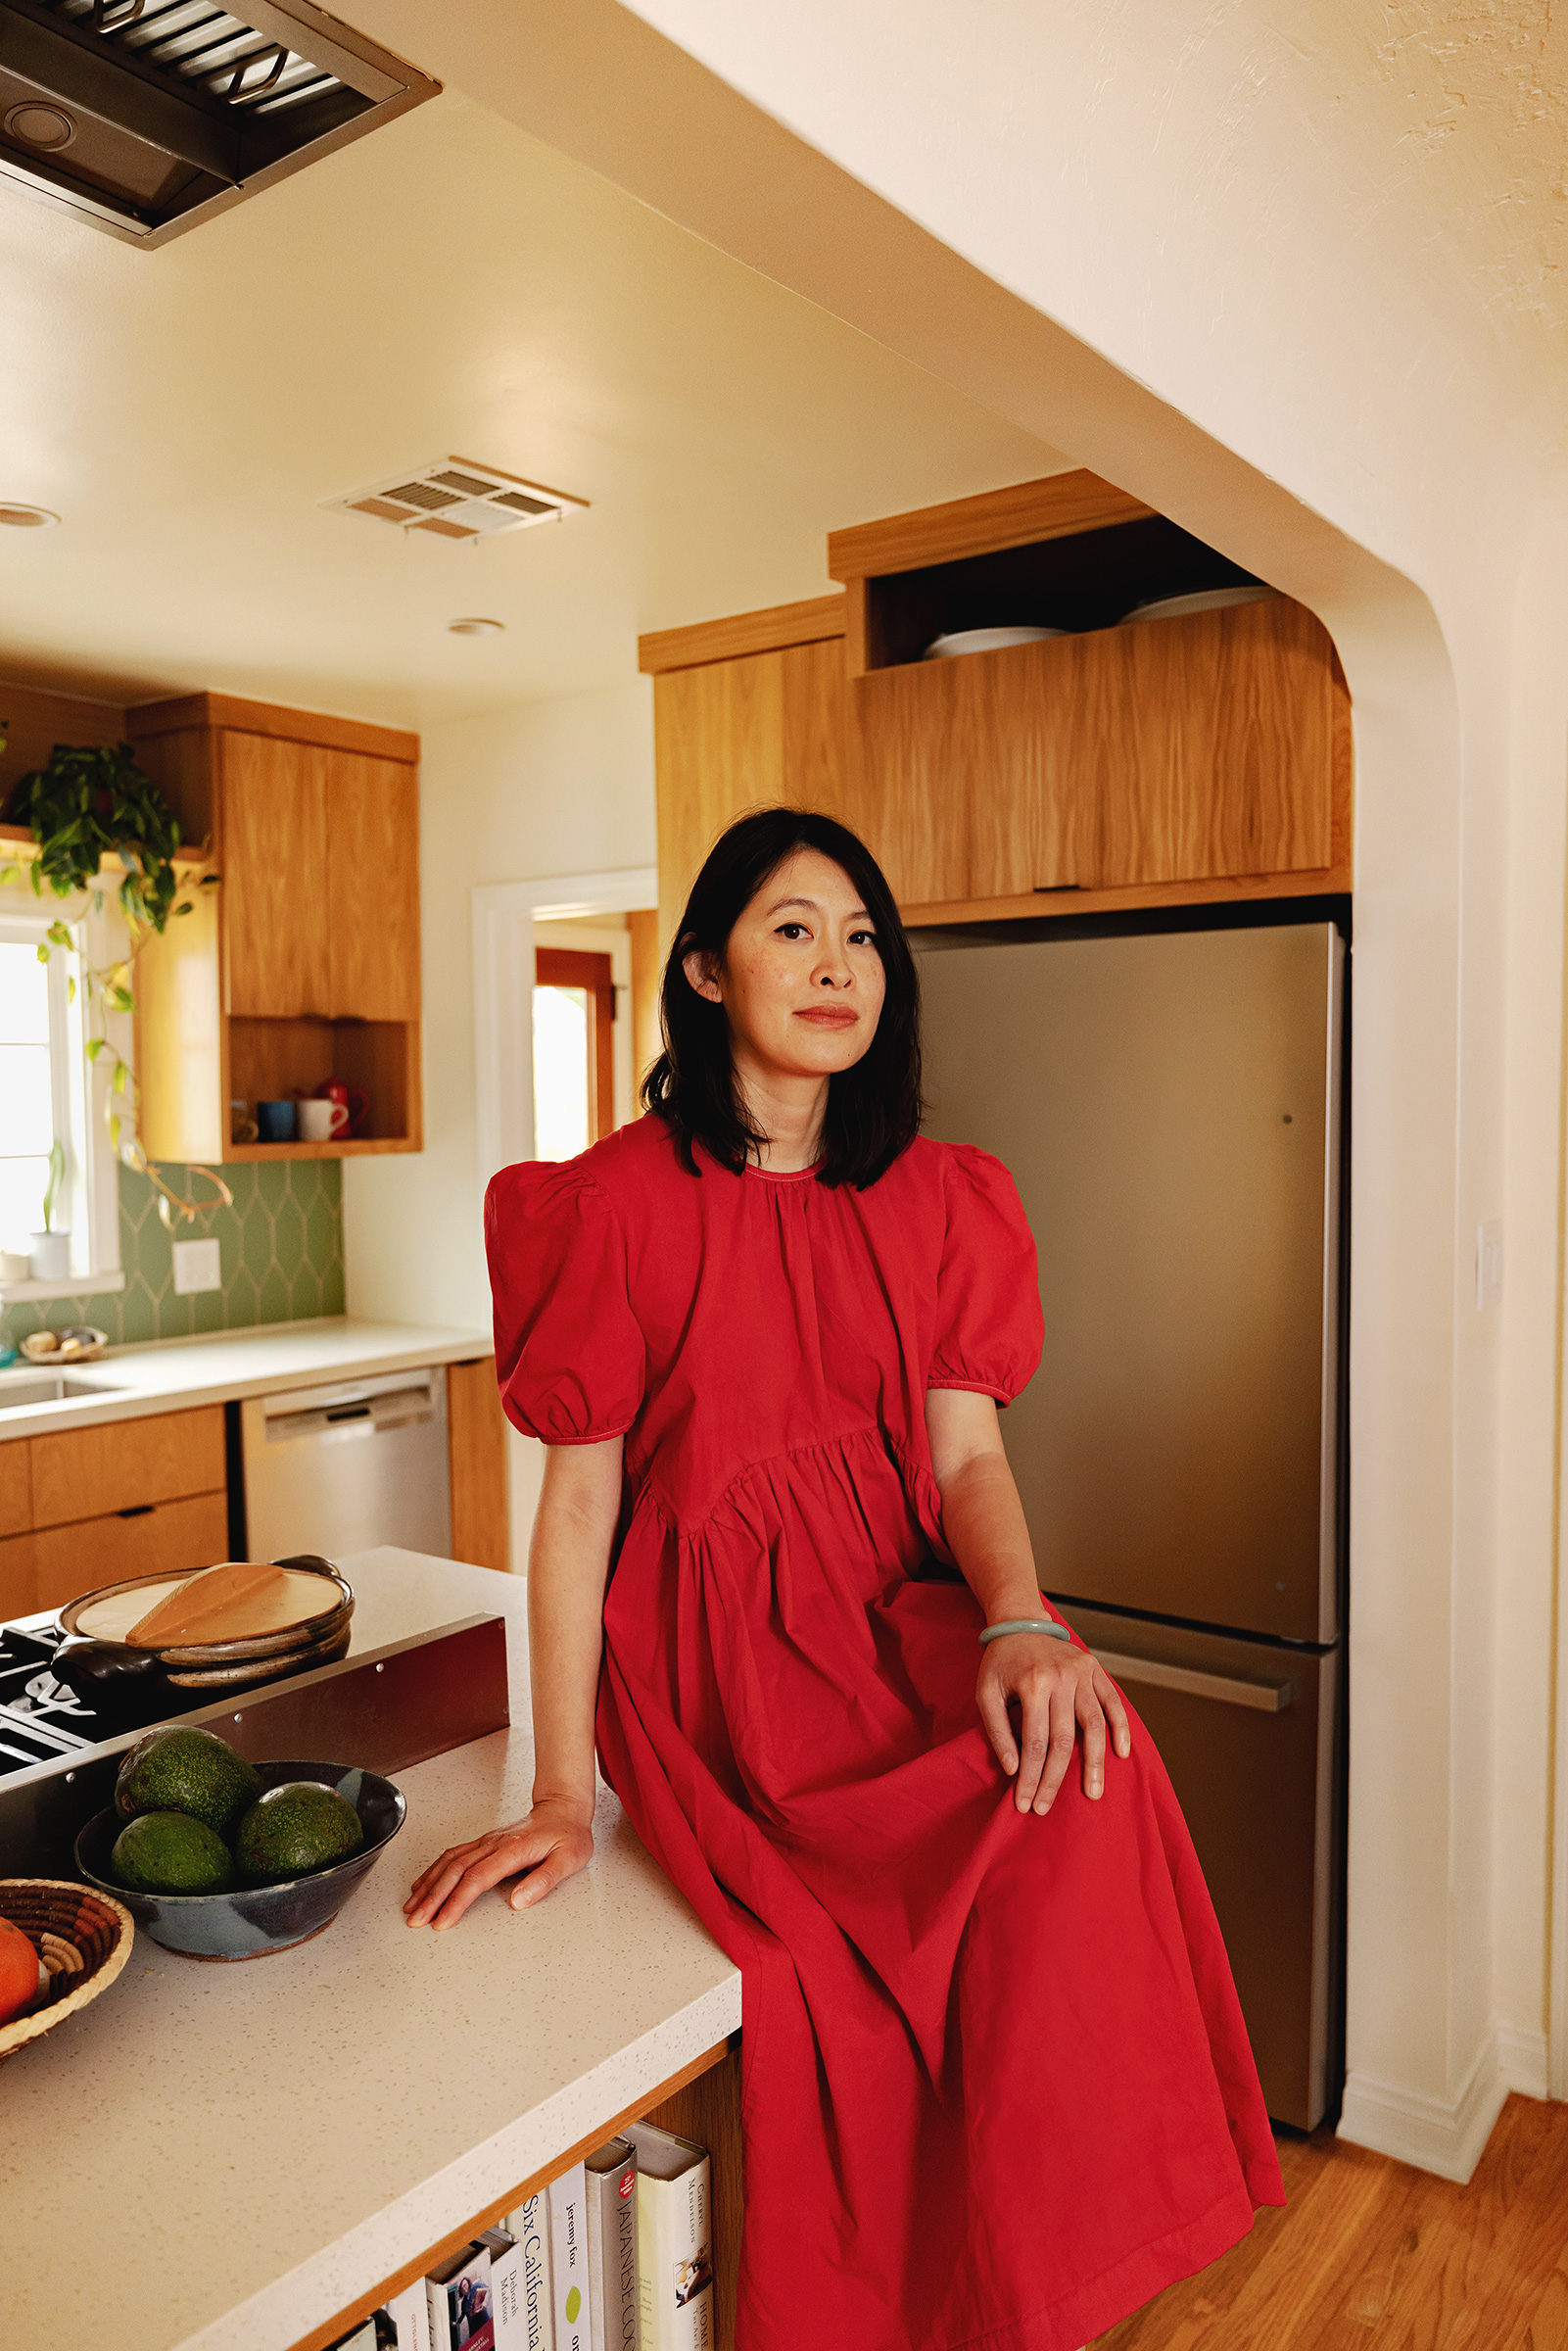 In The Kitchen With ‘Real Americans’ Author Rachel Khong